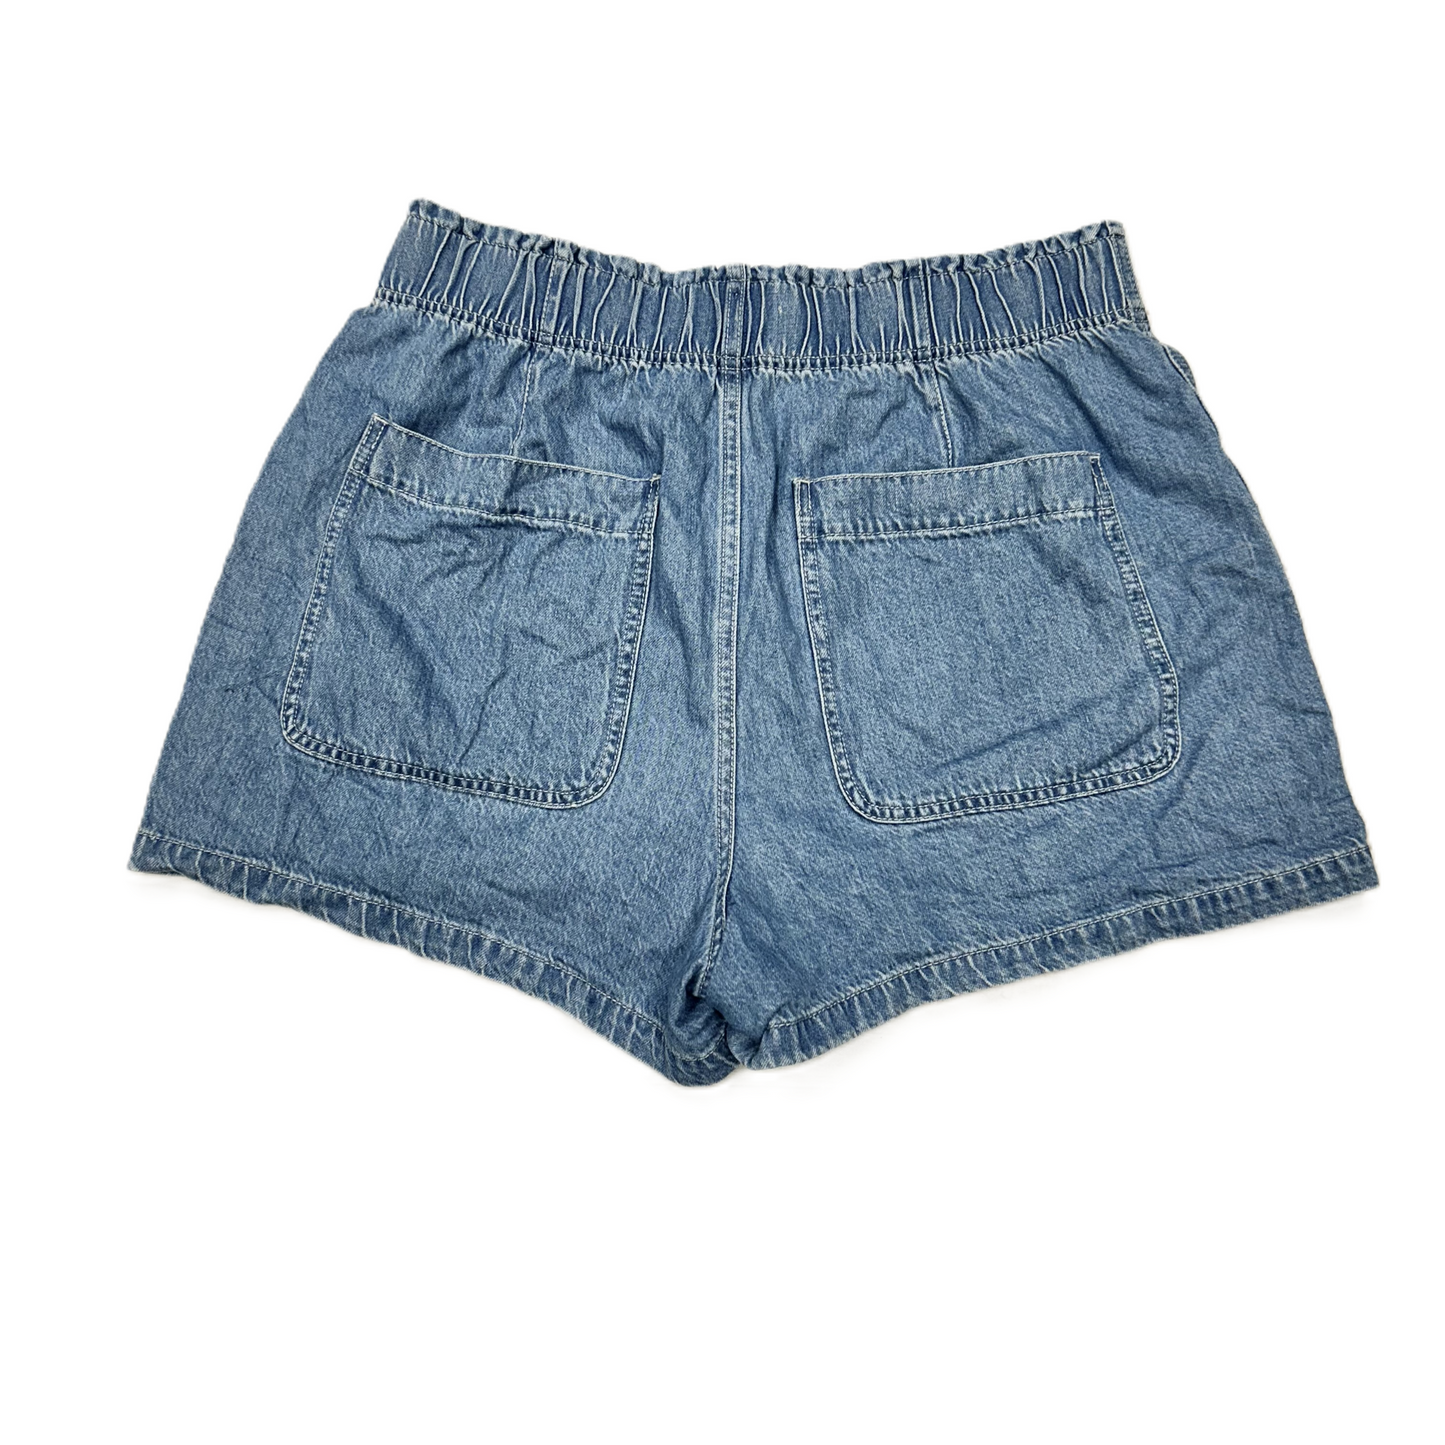 Blue Denim Shorts By Madewell, Size: 10